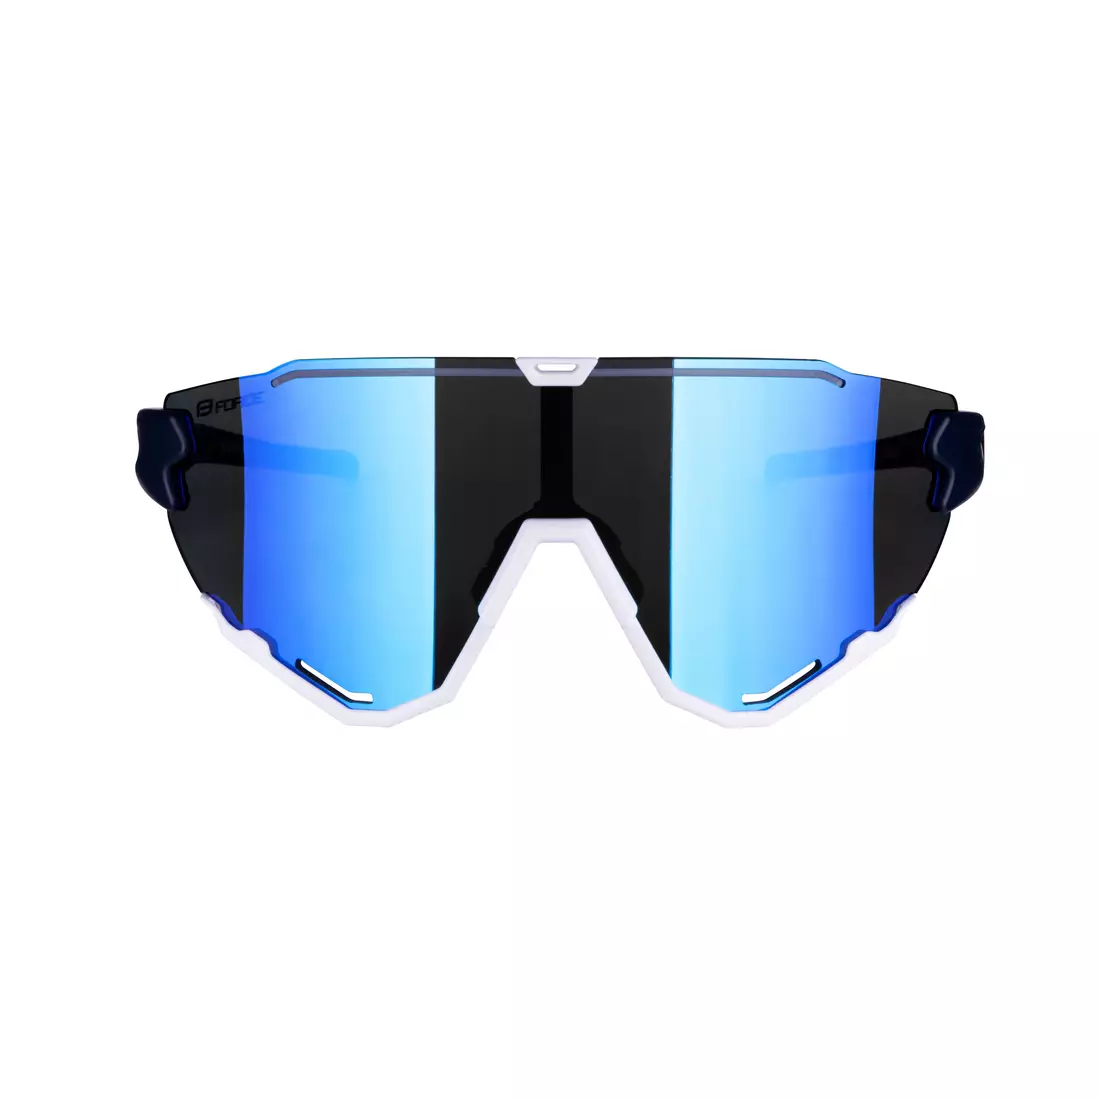 FORCE cycling / sports glasses CREED blue-fluo, 91184